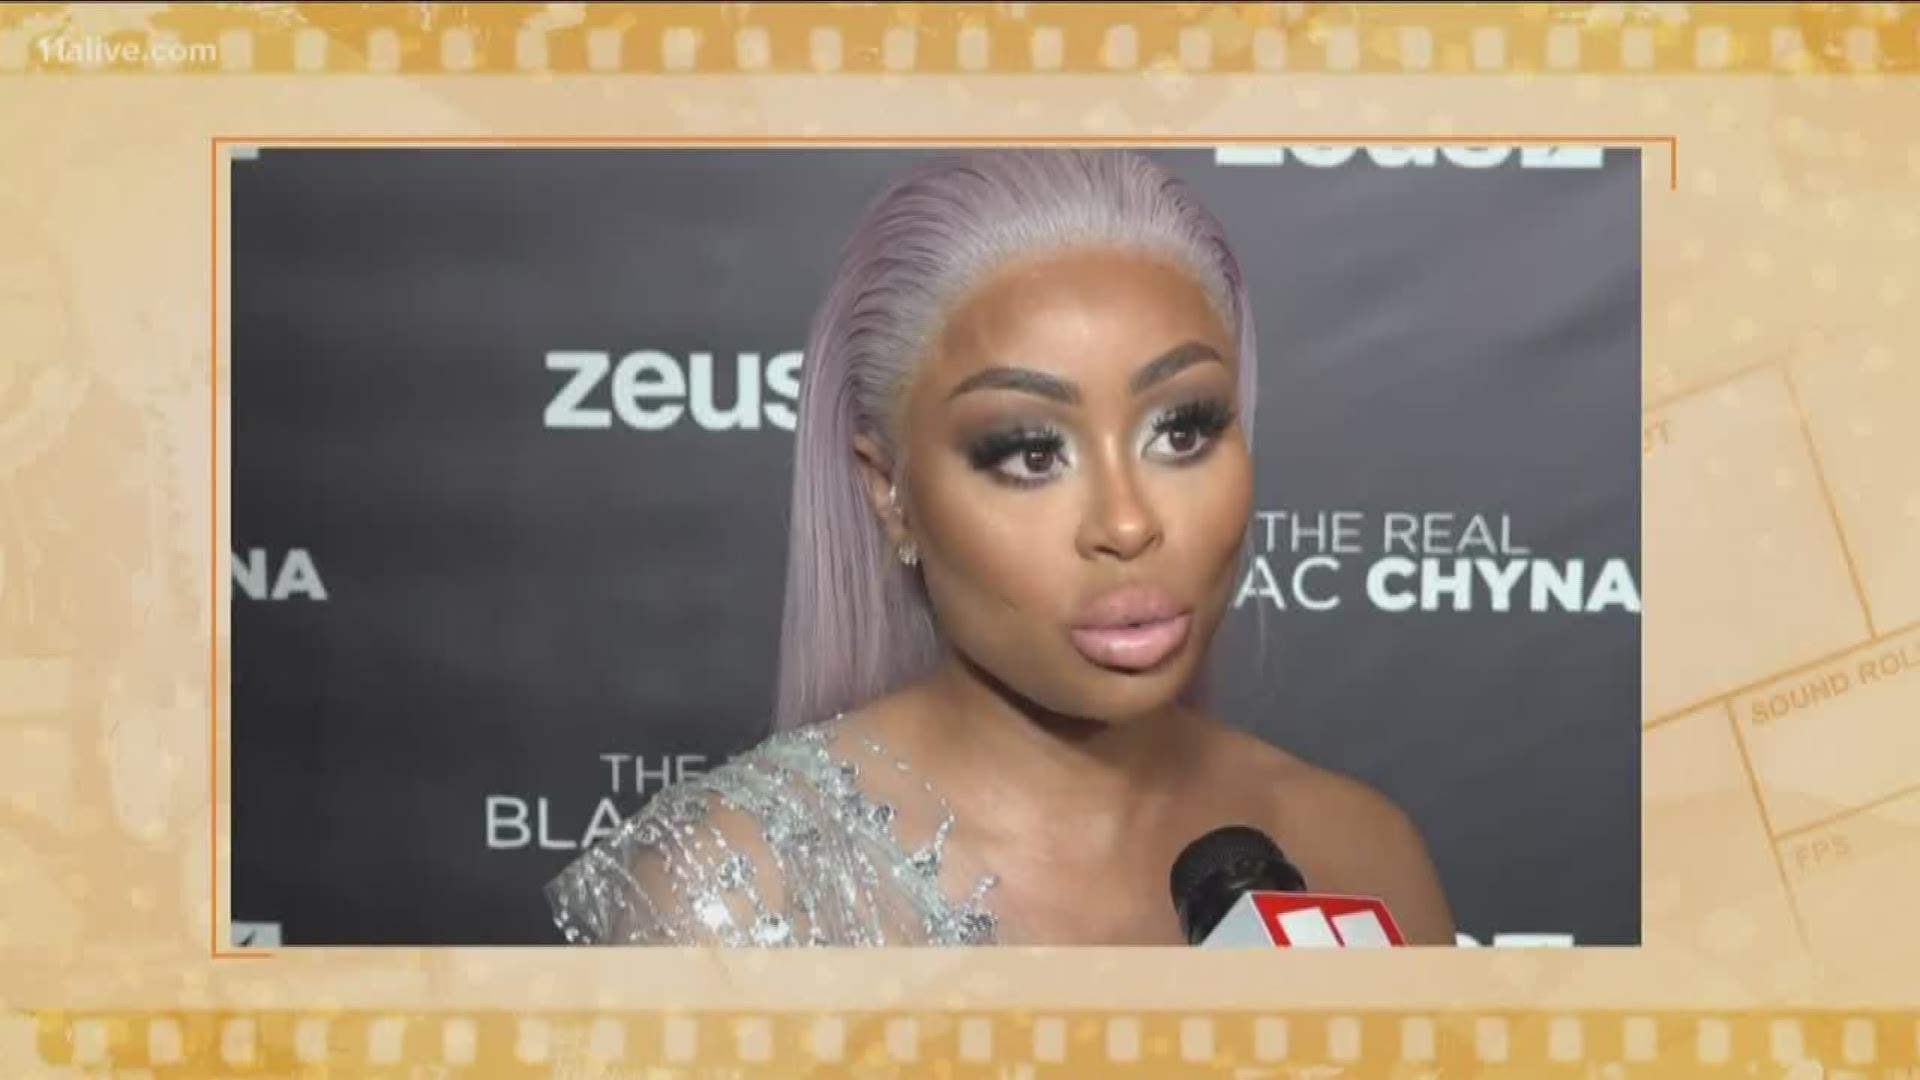 'The Real Blac Chyna' will air on the Zeus Network.